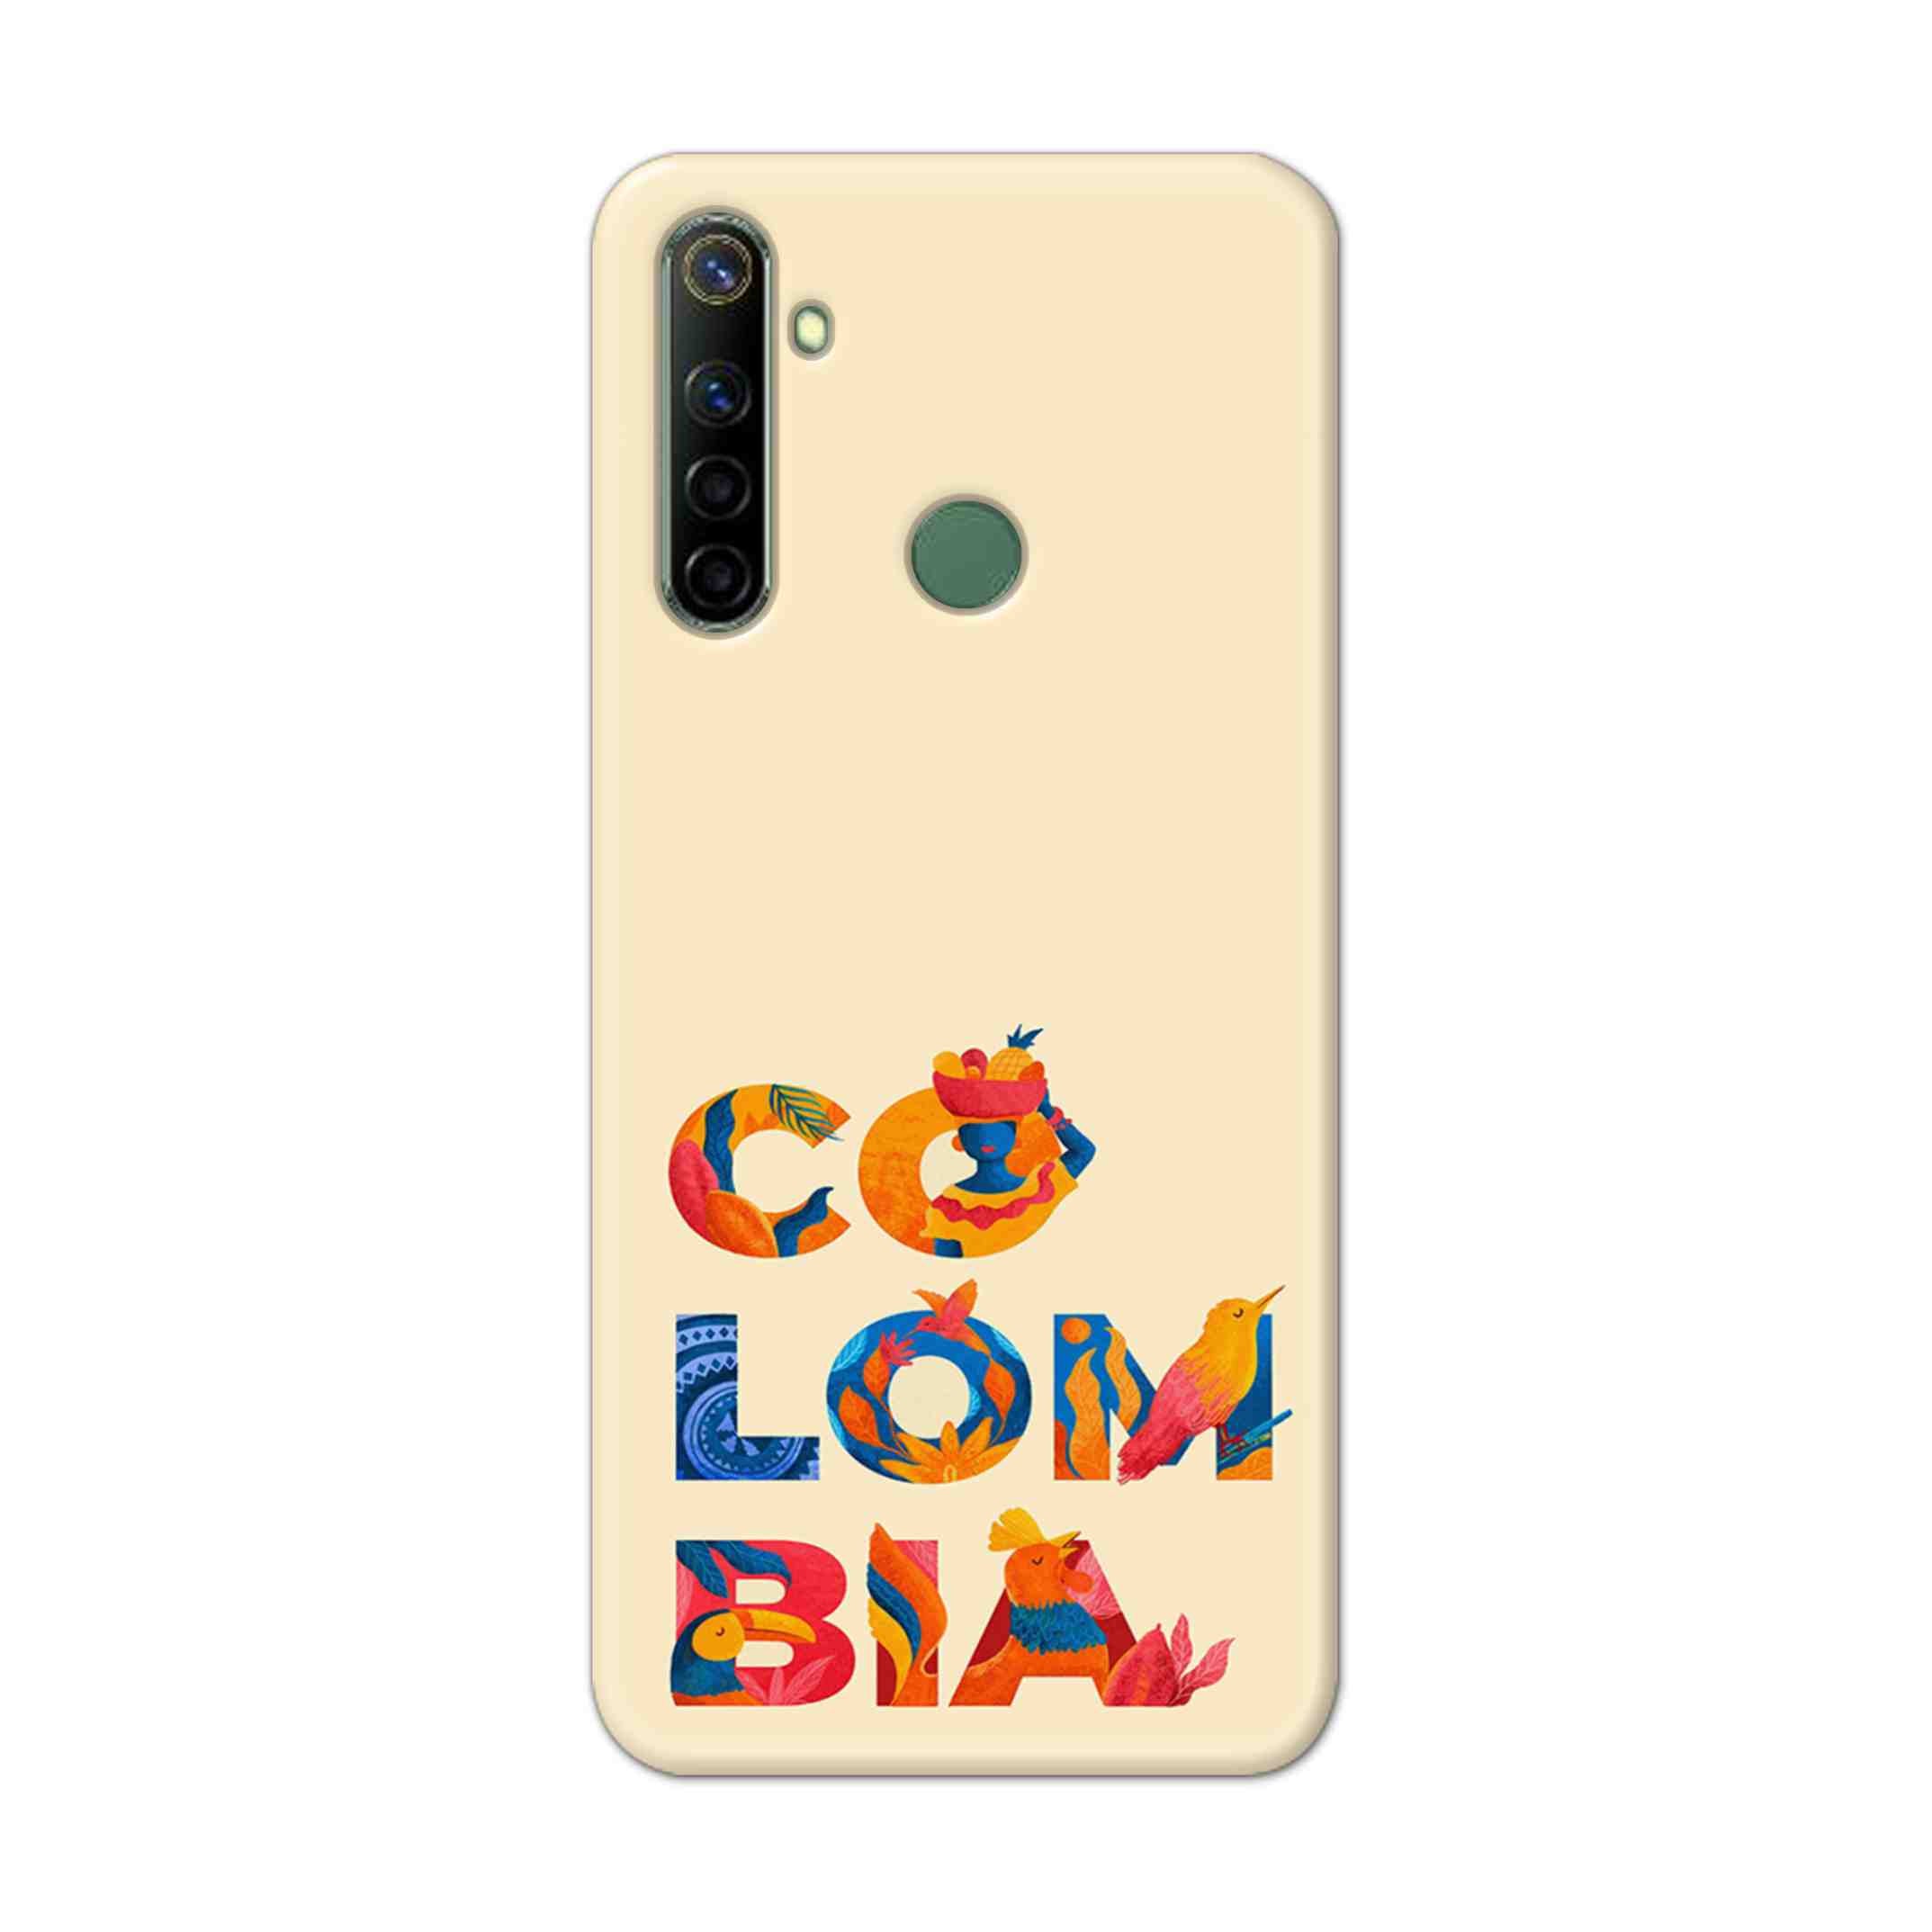 Buy Colombia Hard Back Mobile Phone Case Cover For Realme Narzo 10a Online